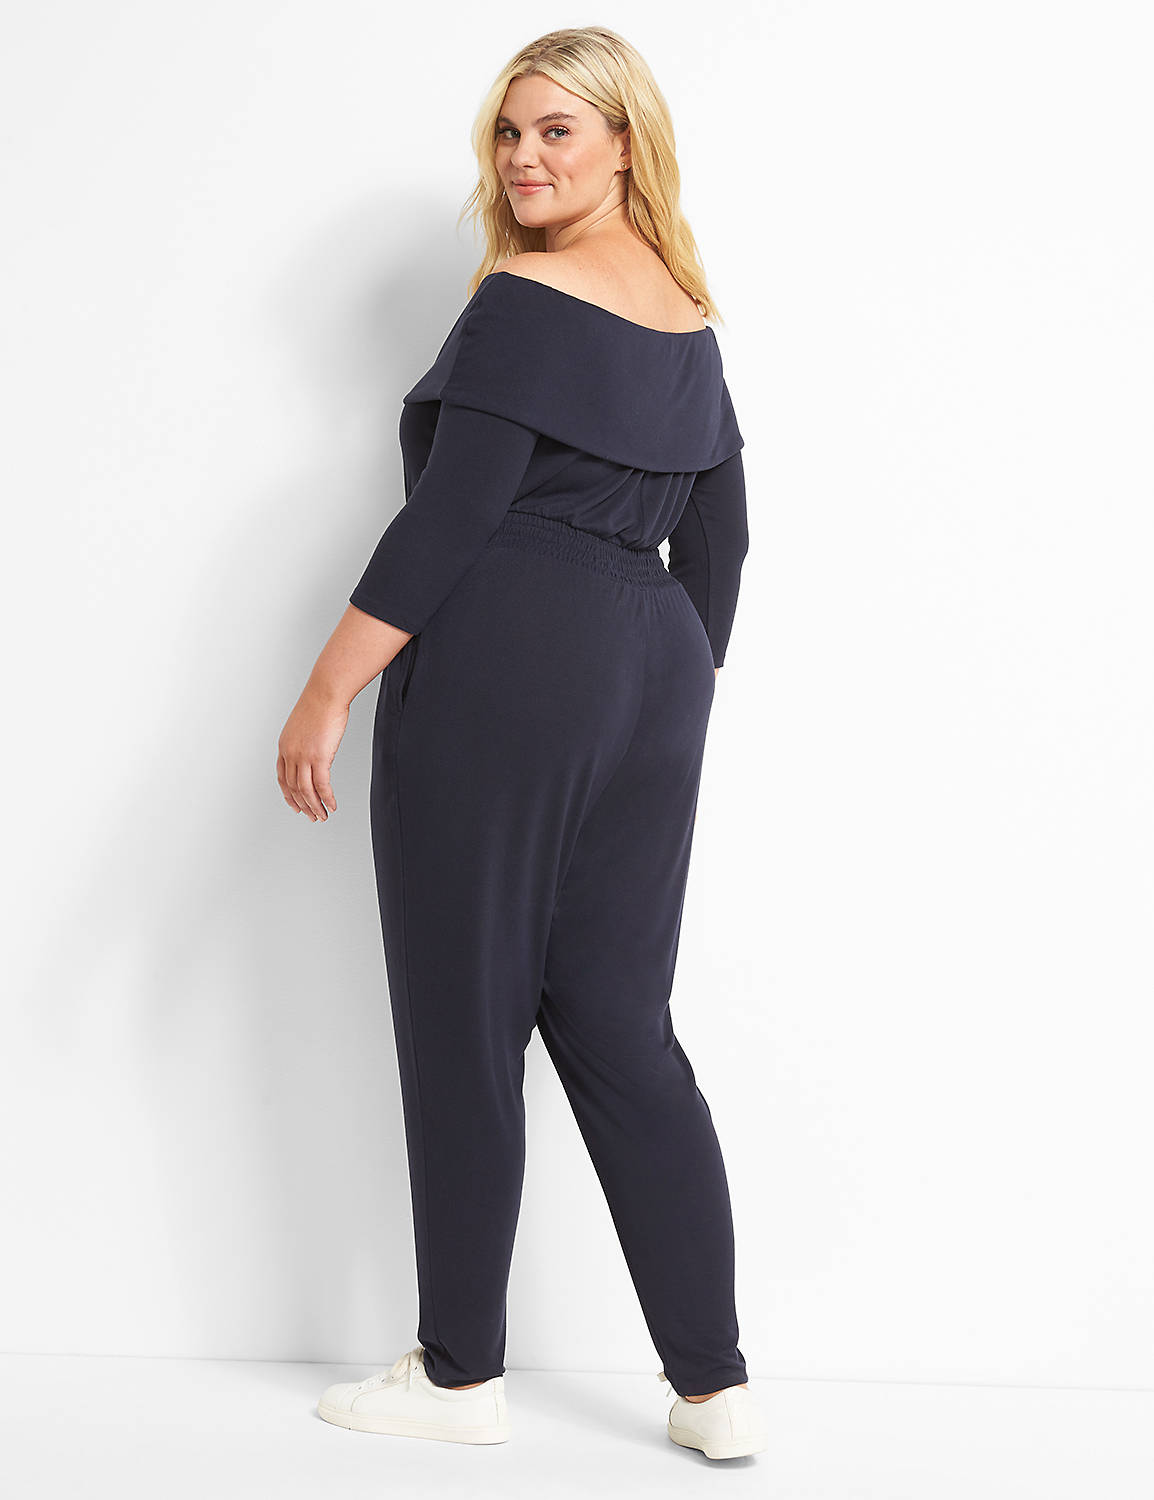 3/4 Sleeve Off The Shoulder Hacci Jumpsuit 1122293:PANTONE Night Sky:10/12 Product Image 2